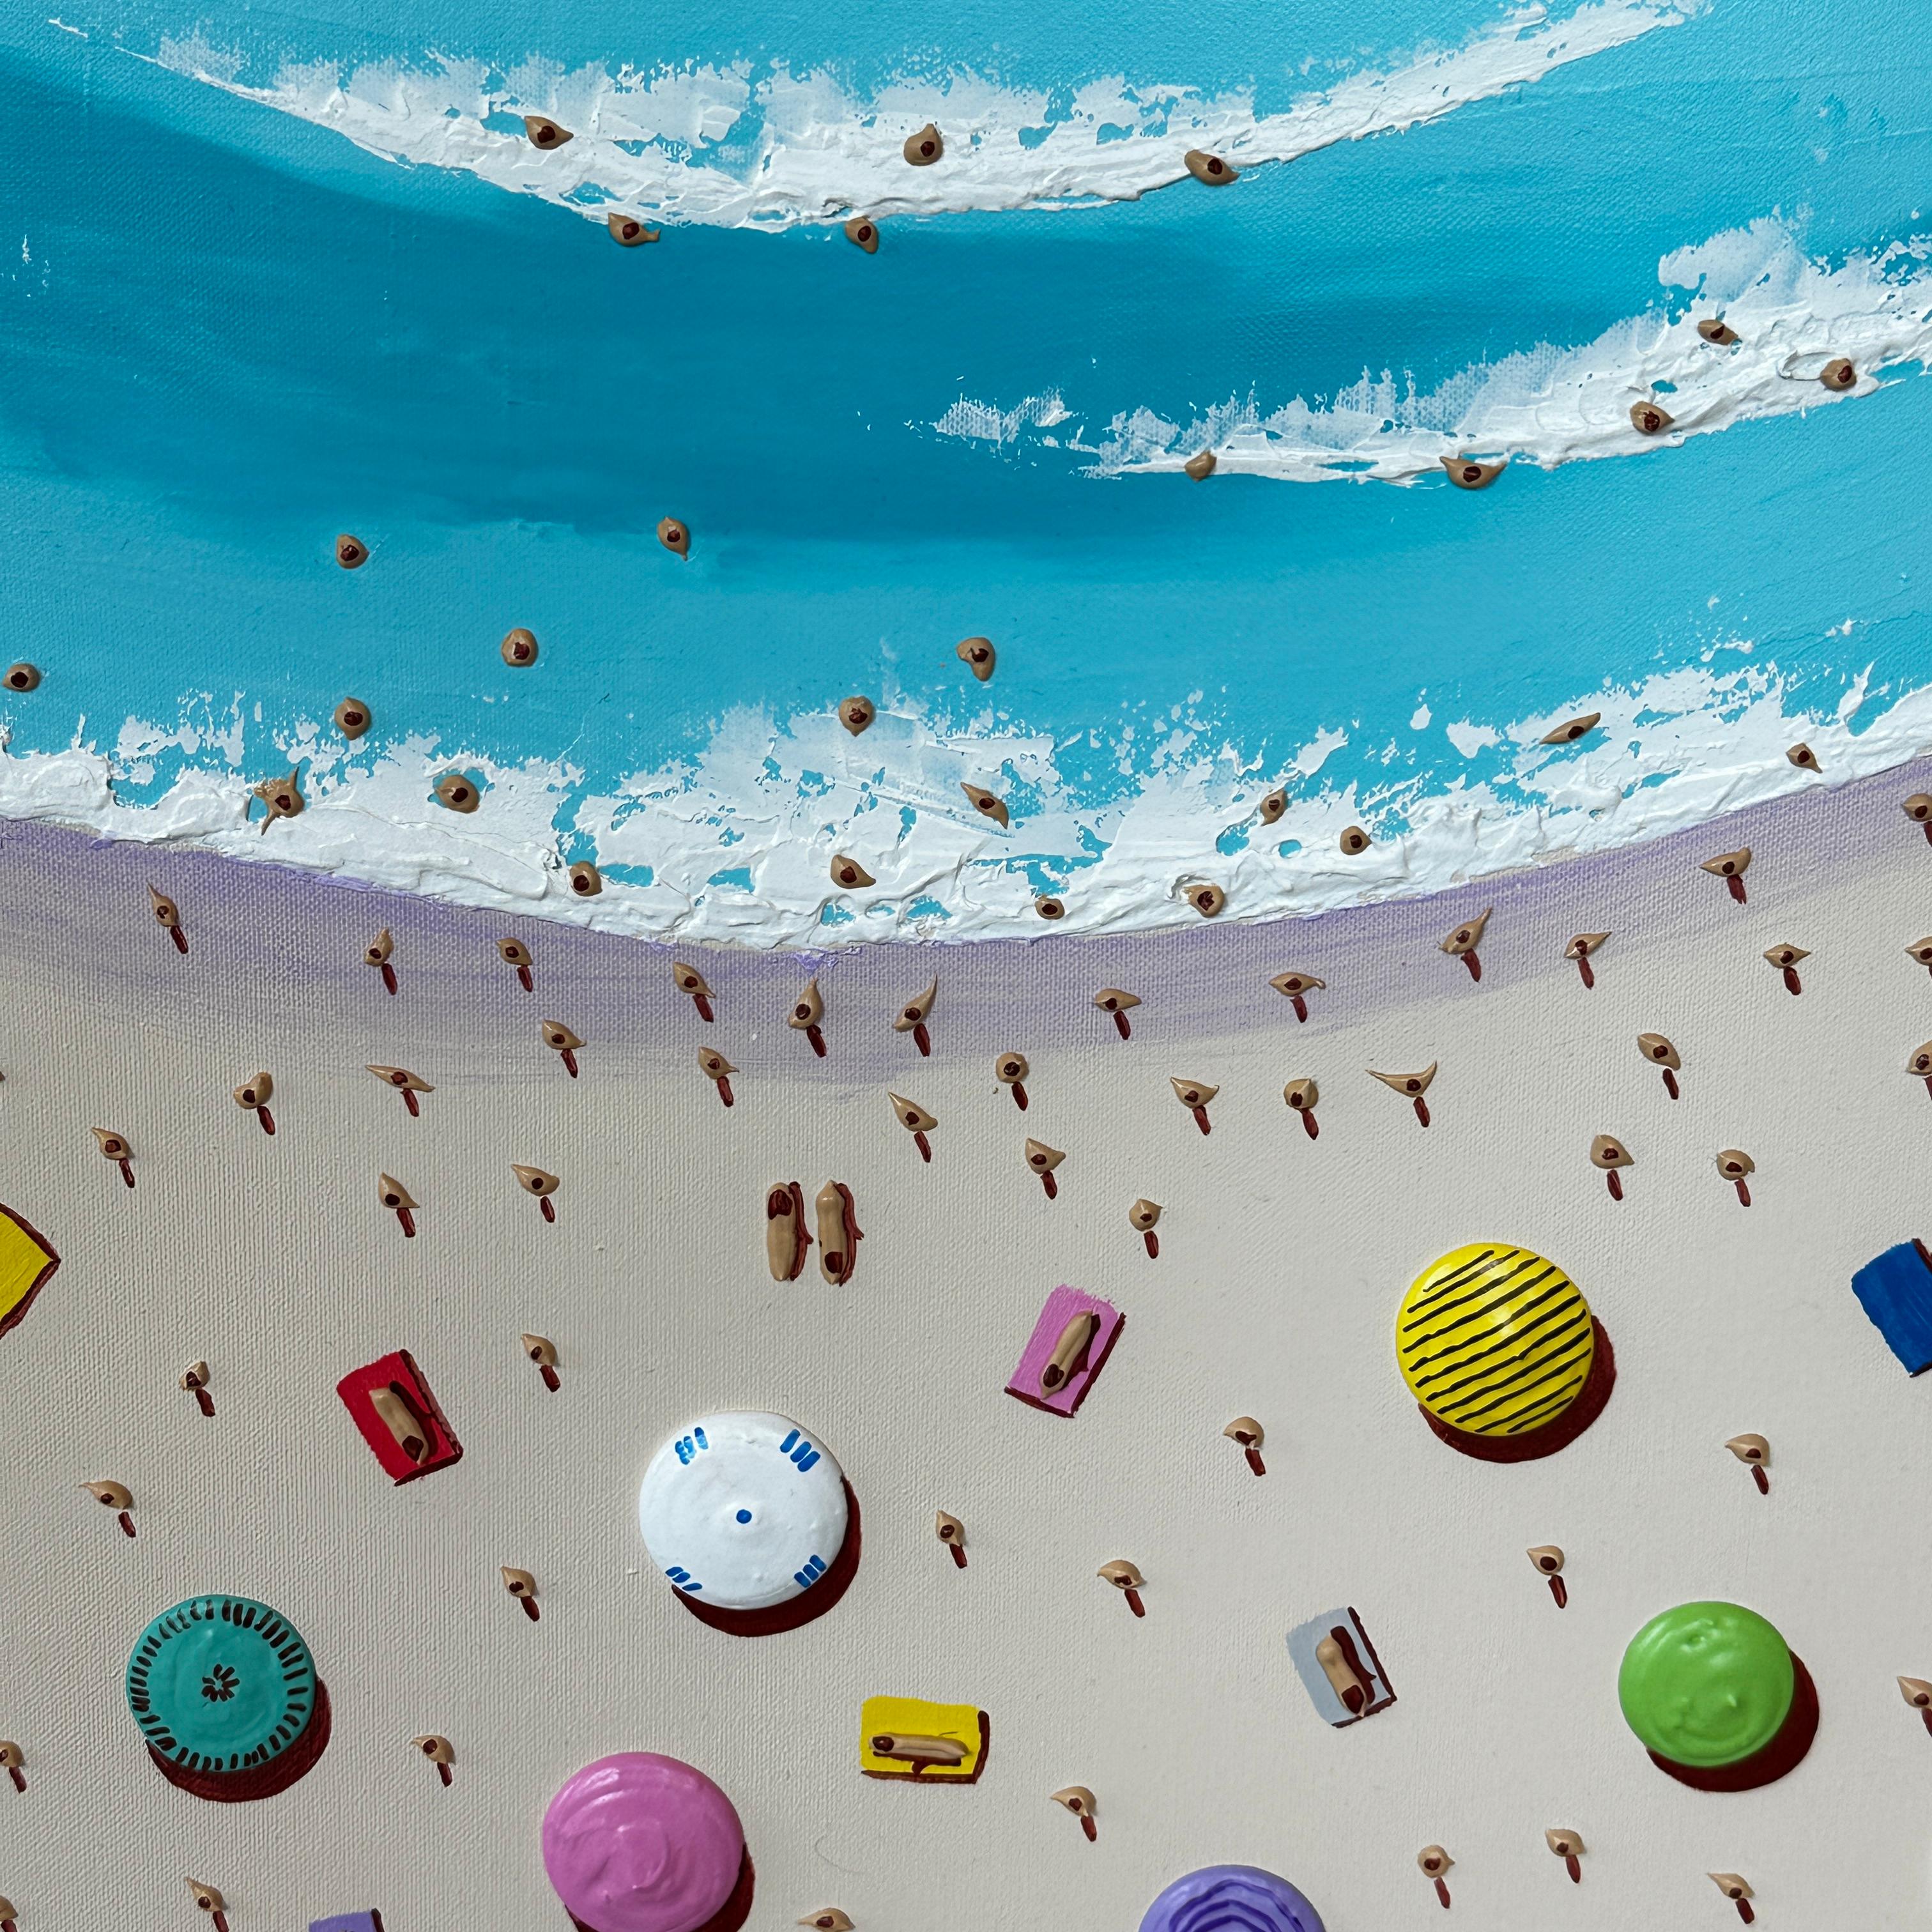 'Fun in the Sun' Colourful 3D Contemporary painting of the beach, umbrellas - Painting by Max Todd